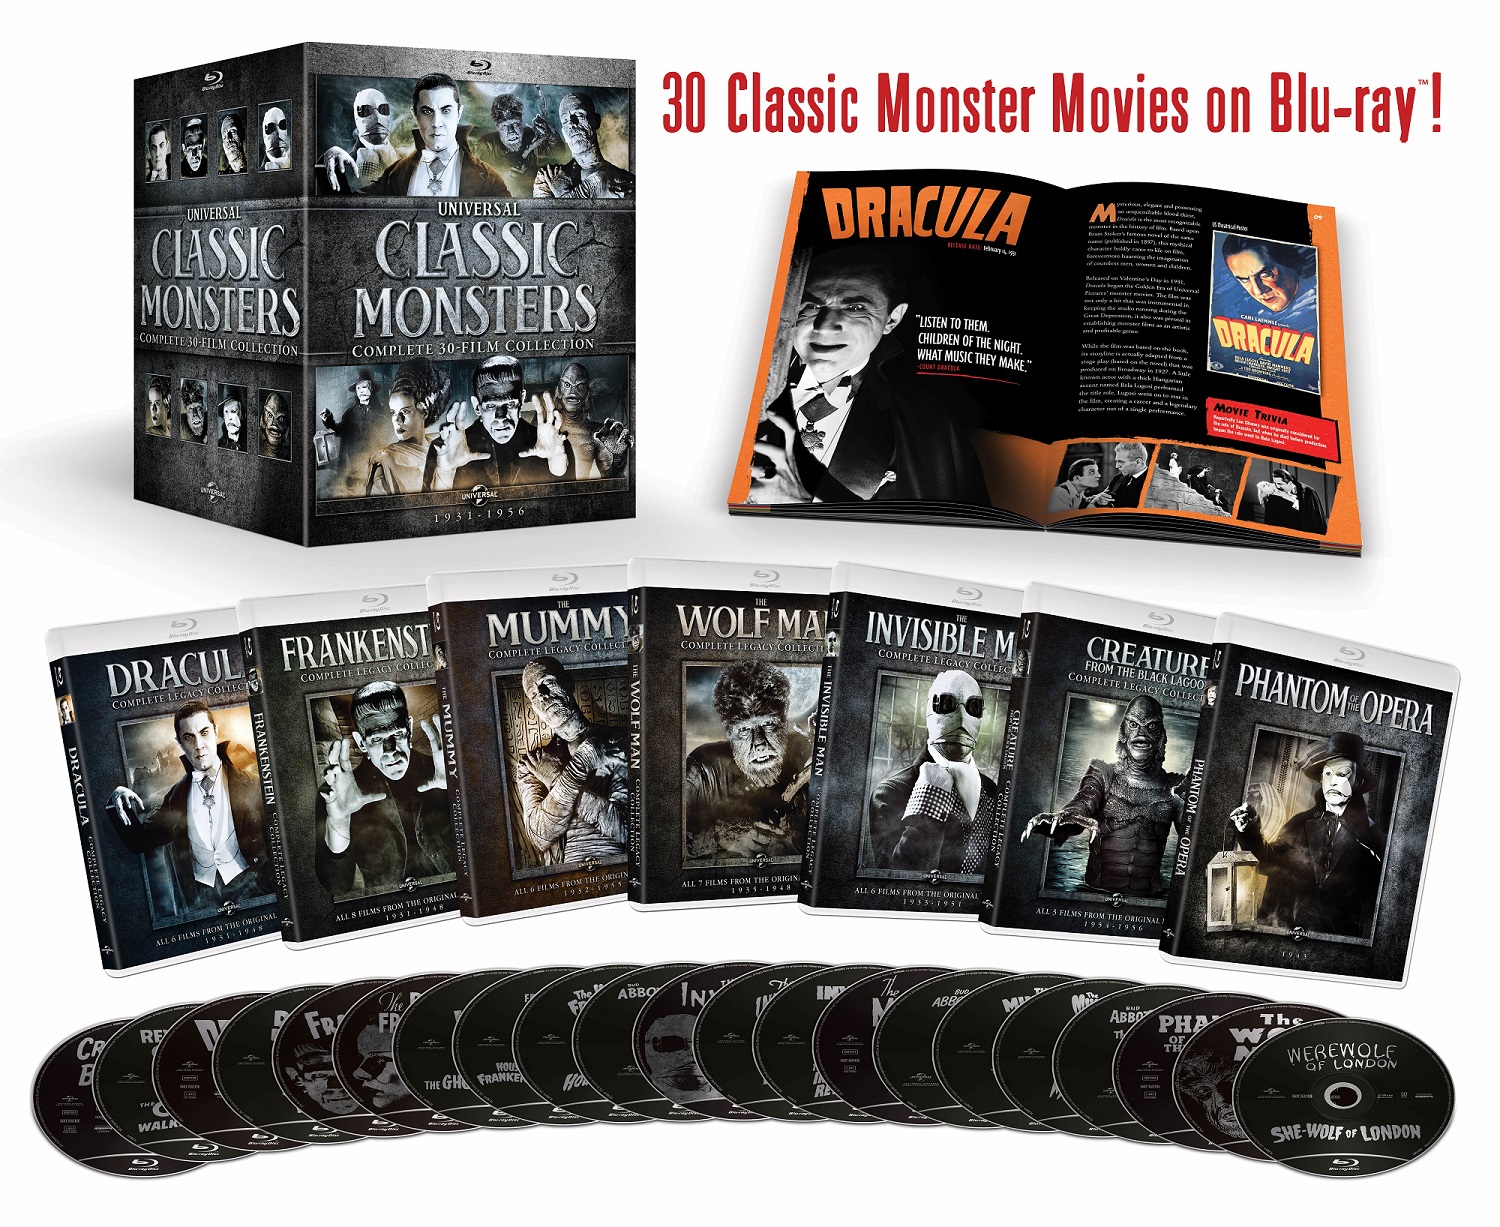 UNIVERSAL CLASSIC MONSTERS: COMPLETE 30-FILM COLLECTION Blu-ray release